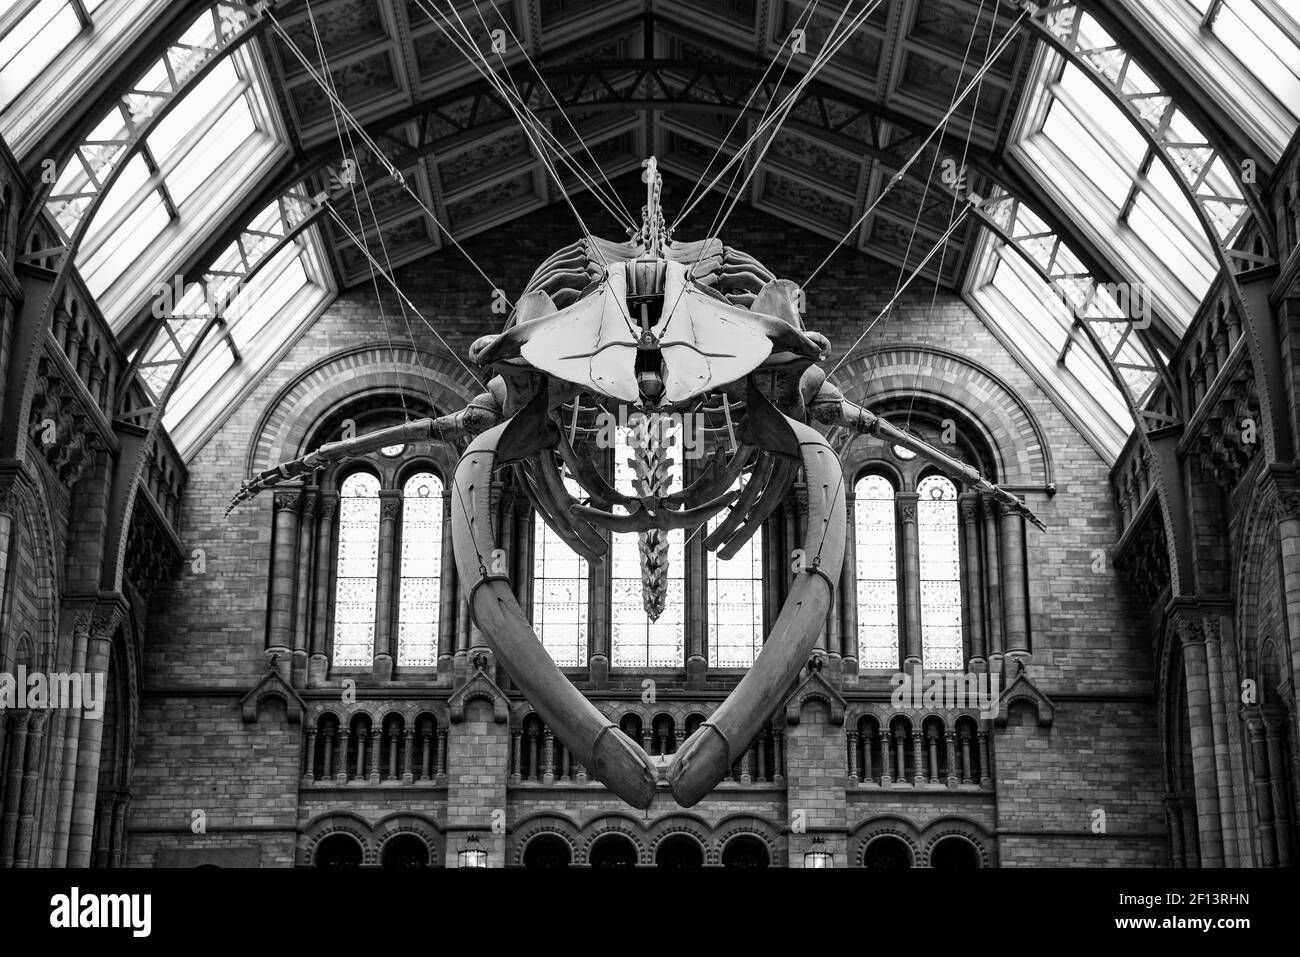 The Interior of Natural History Museum with Whale Skeleton, Londres, Royaume-Uni (noir et blanc) Banque D'Images